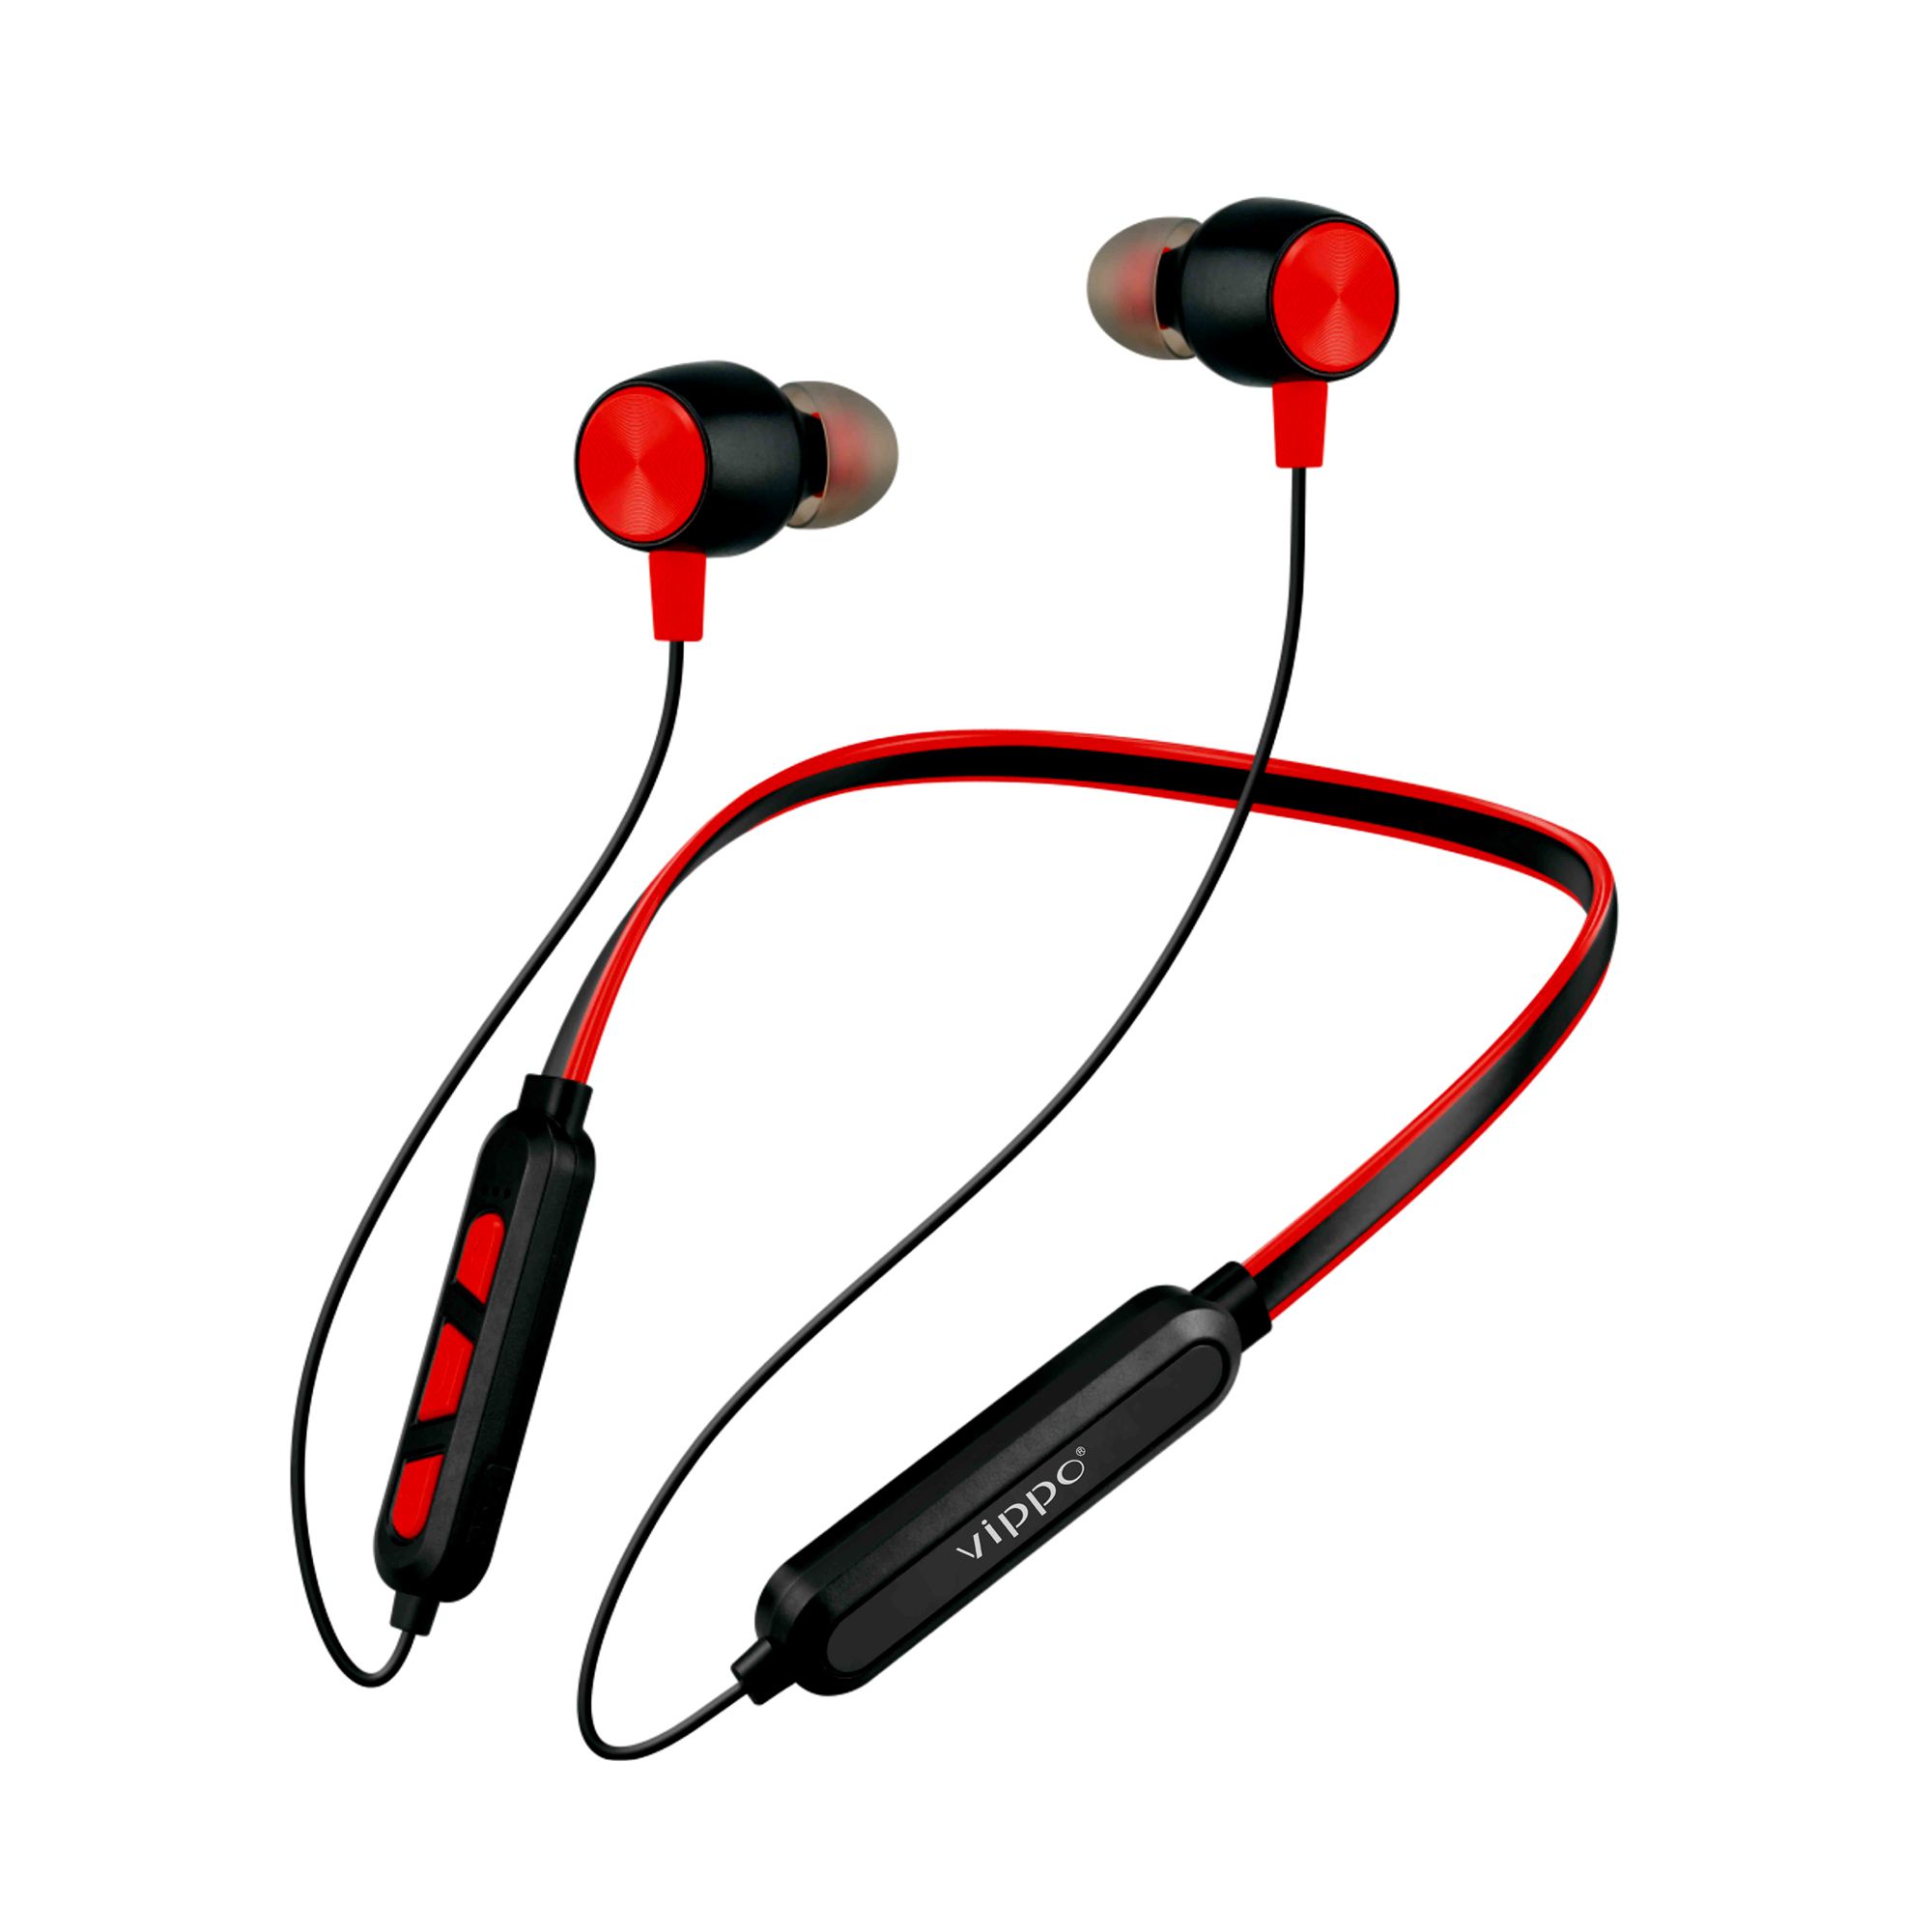 VIPPO VBT-3949 (18 HOURS Music Playback BATTERY 5.0 Bluetooth ) Wireless SPORT HEADSET Magnetic Neckband With Bass Headphones/Earphones